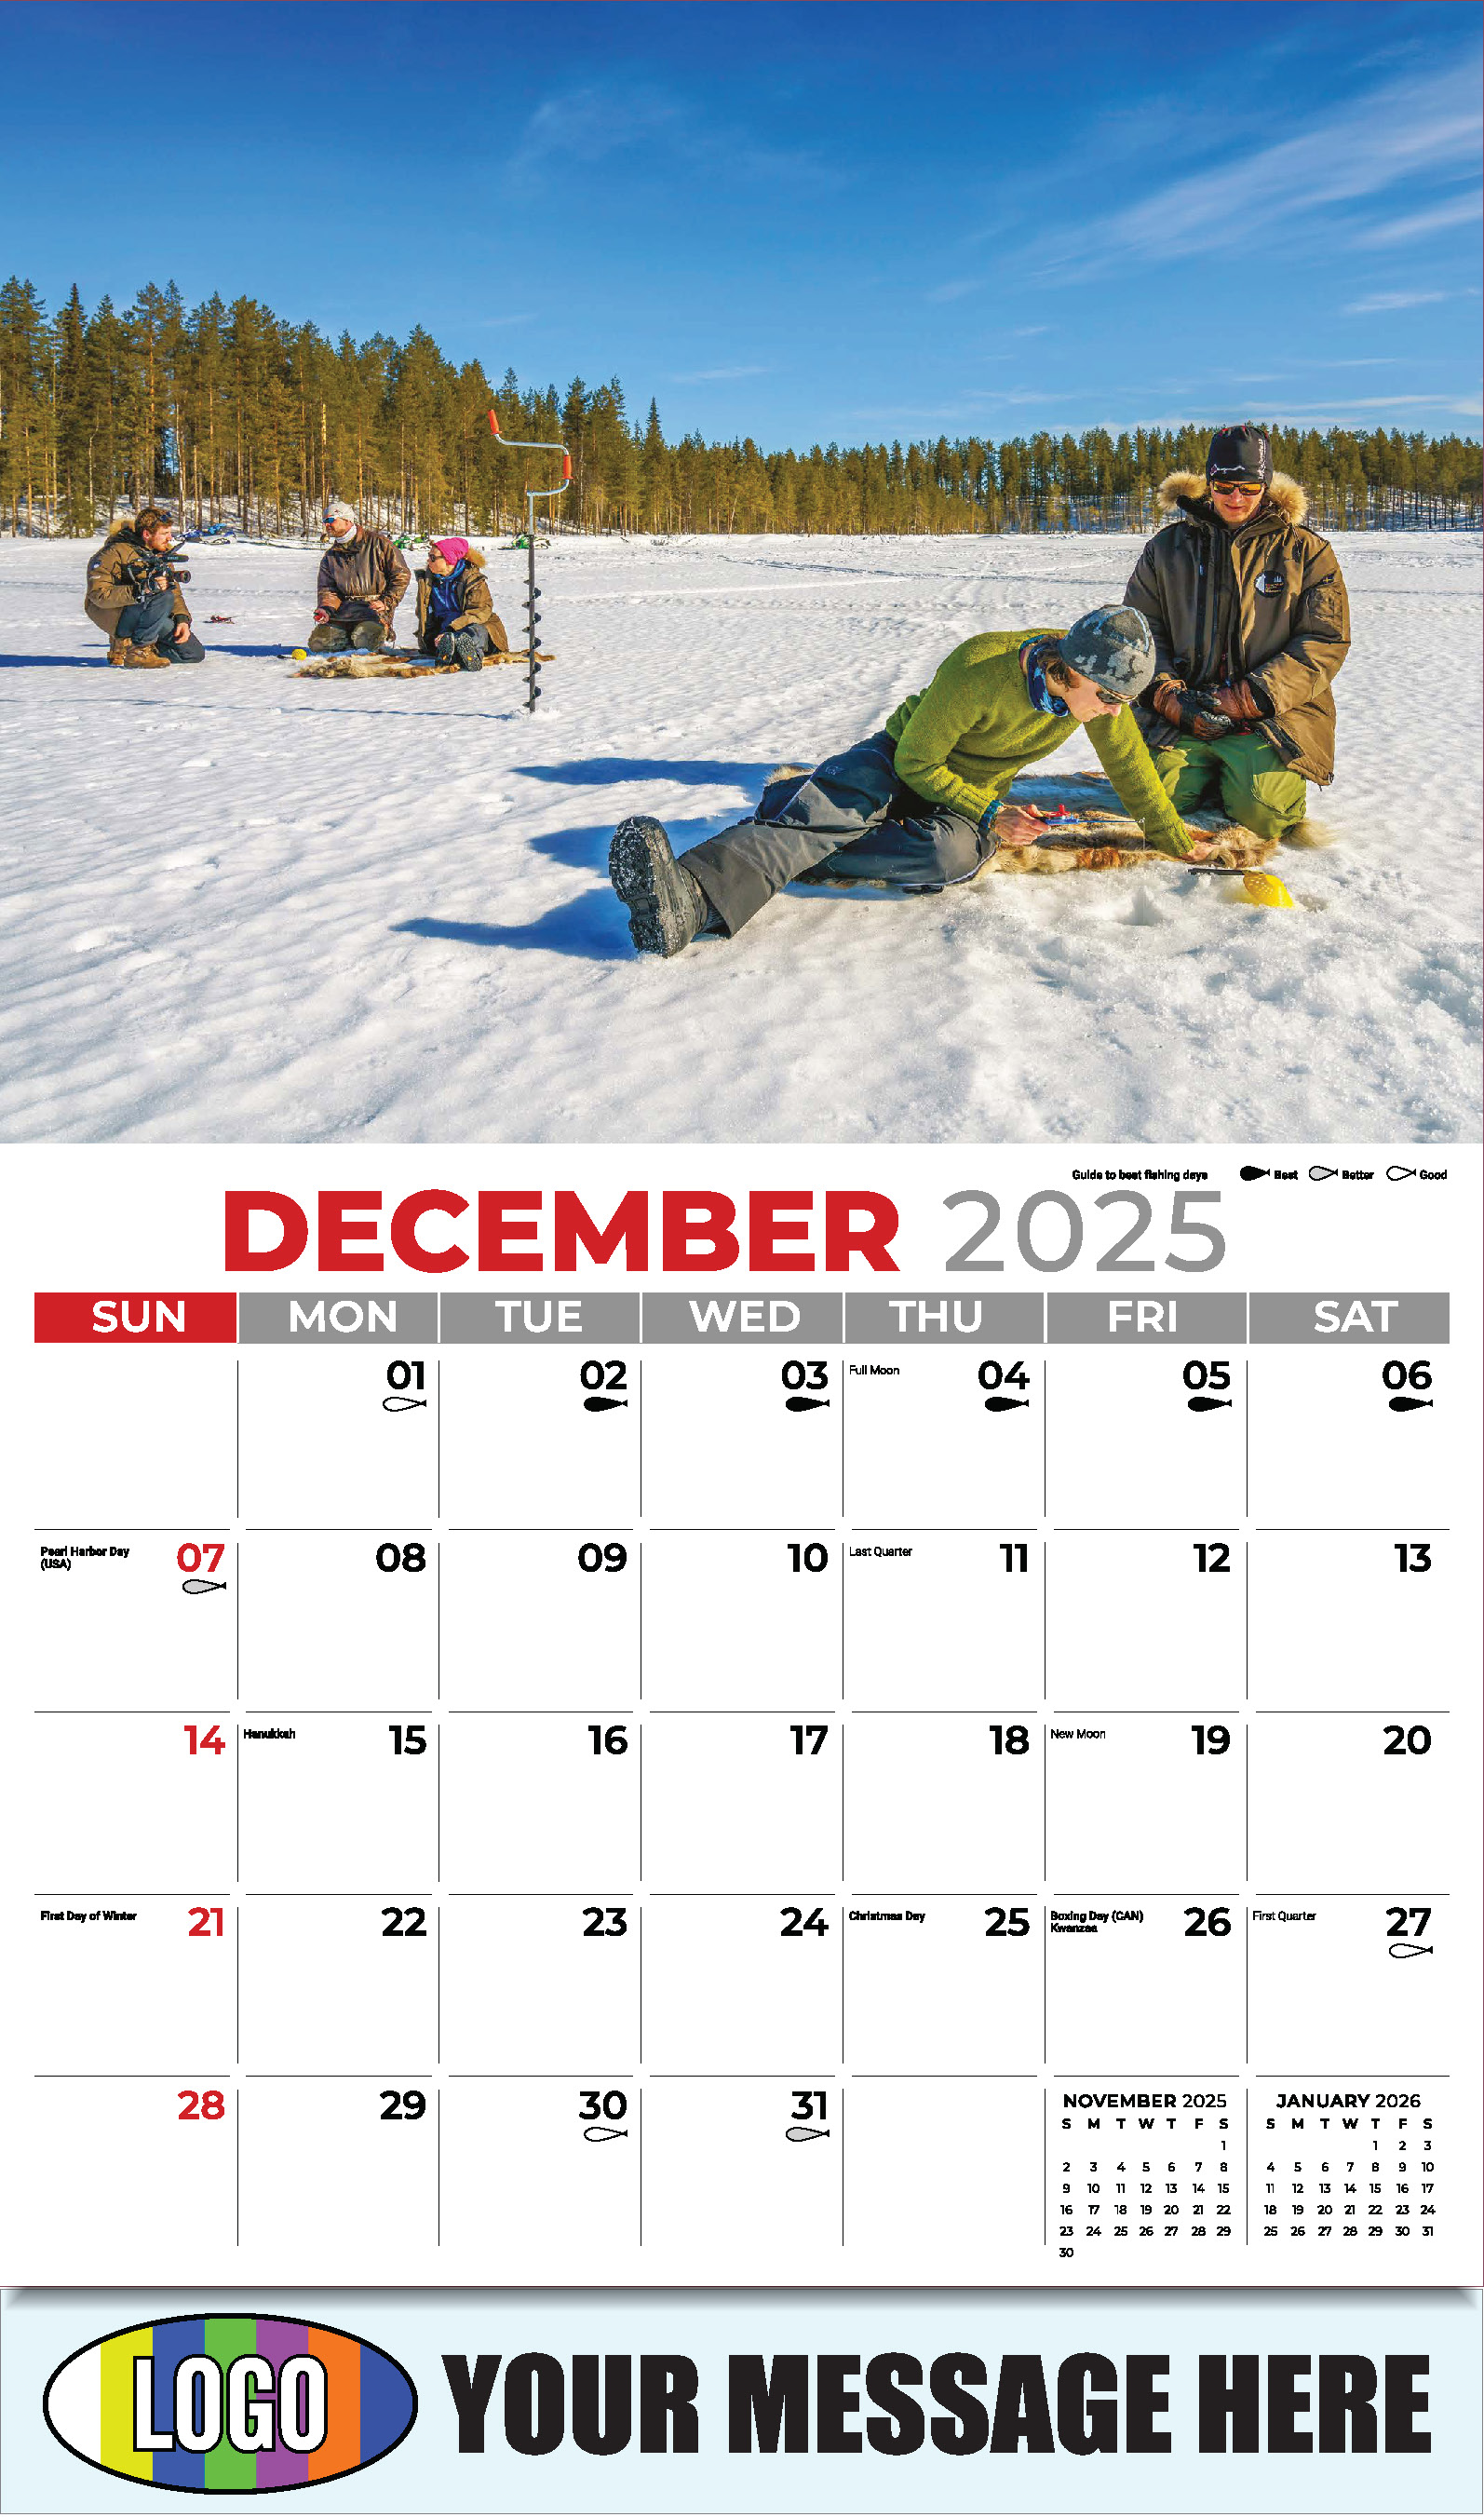 Fishing and Hunting 2025 Business Promotion Calendar - December